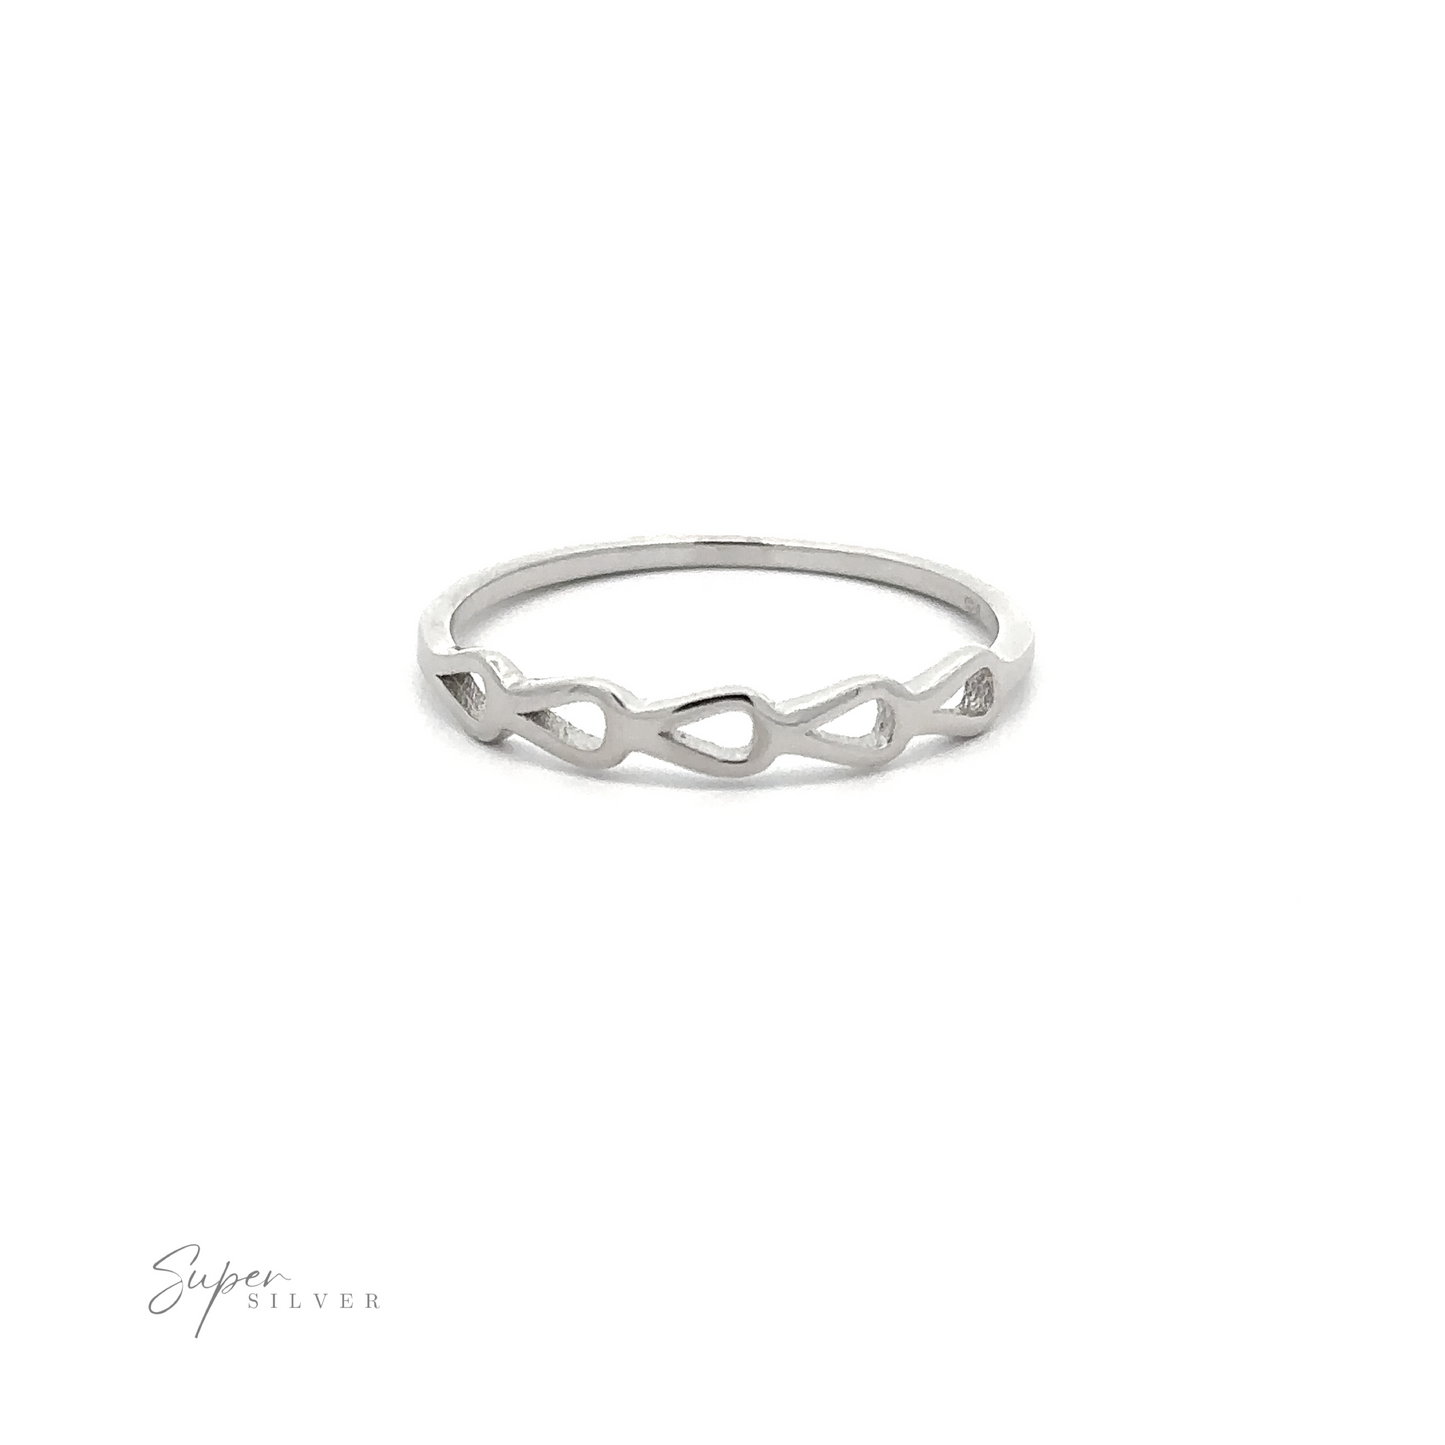 A rhodium plated silver Cutout Teardrop Ring with an infinity design.